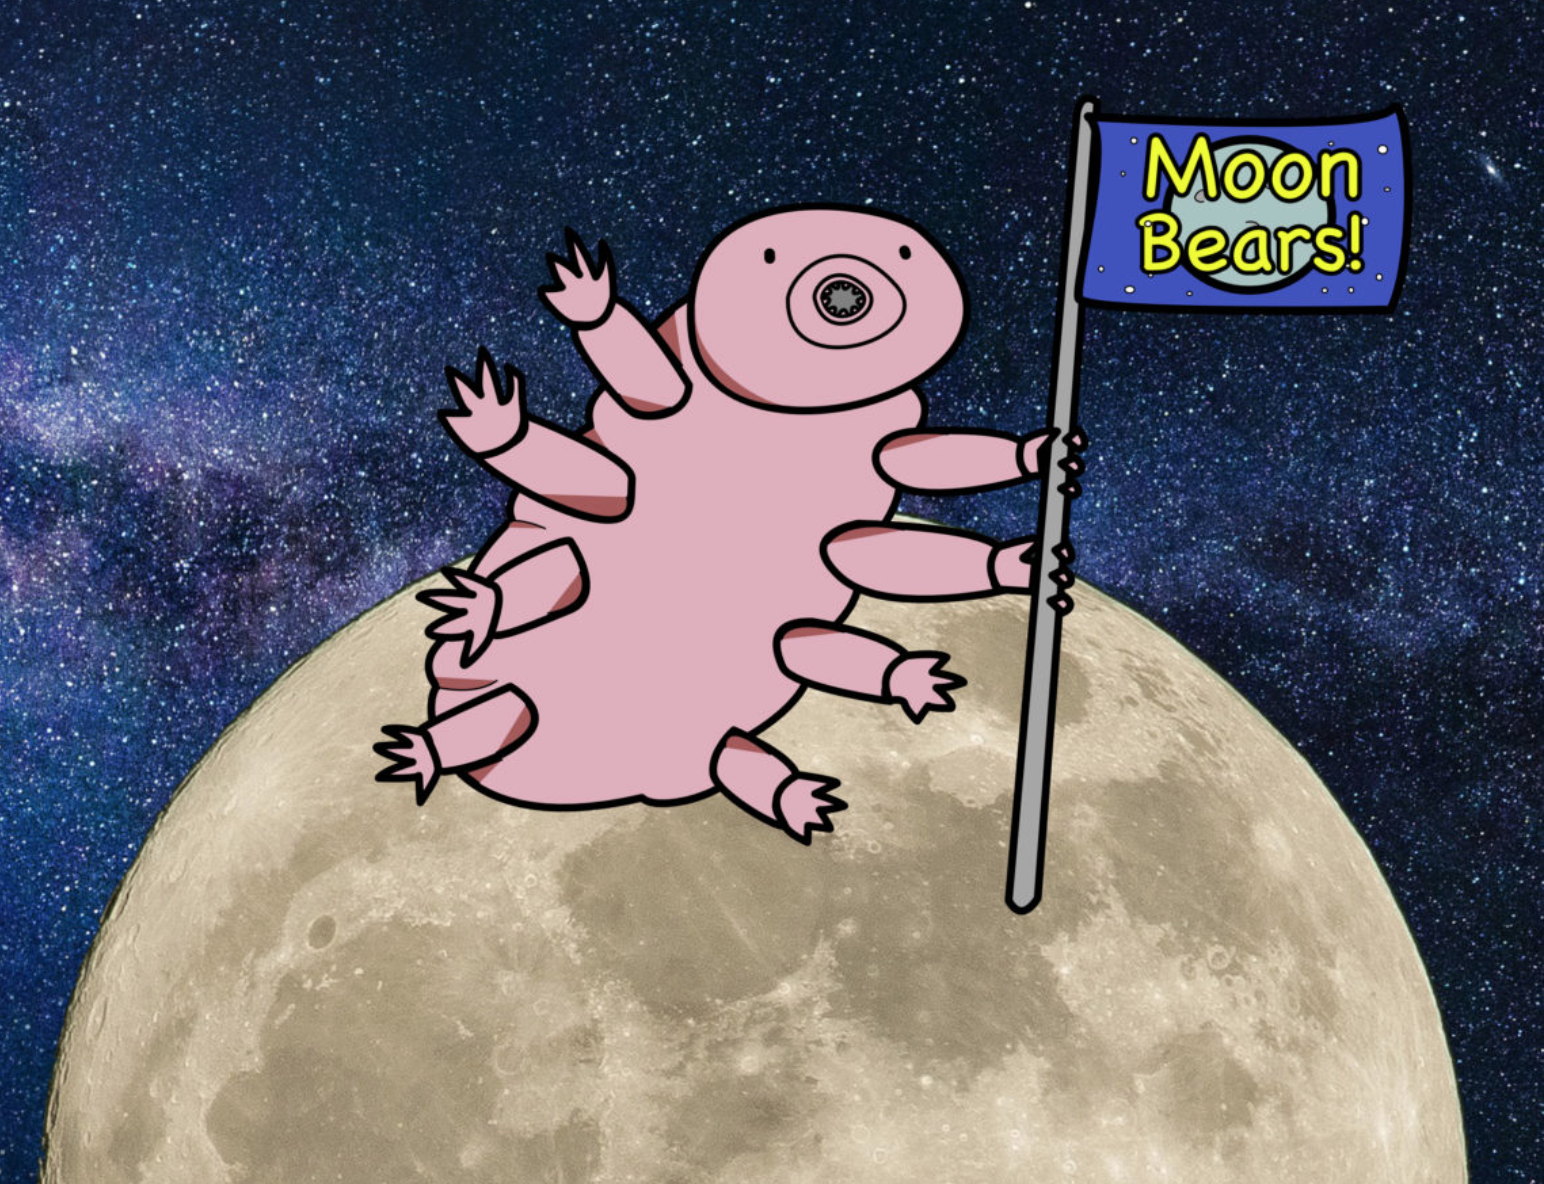 We Have Populate the Moon With Water Bears!